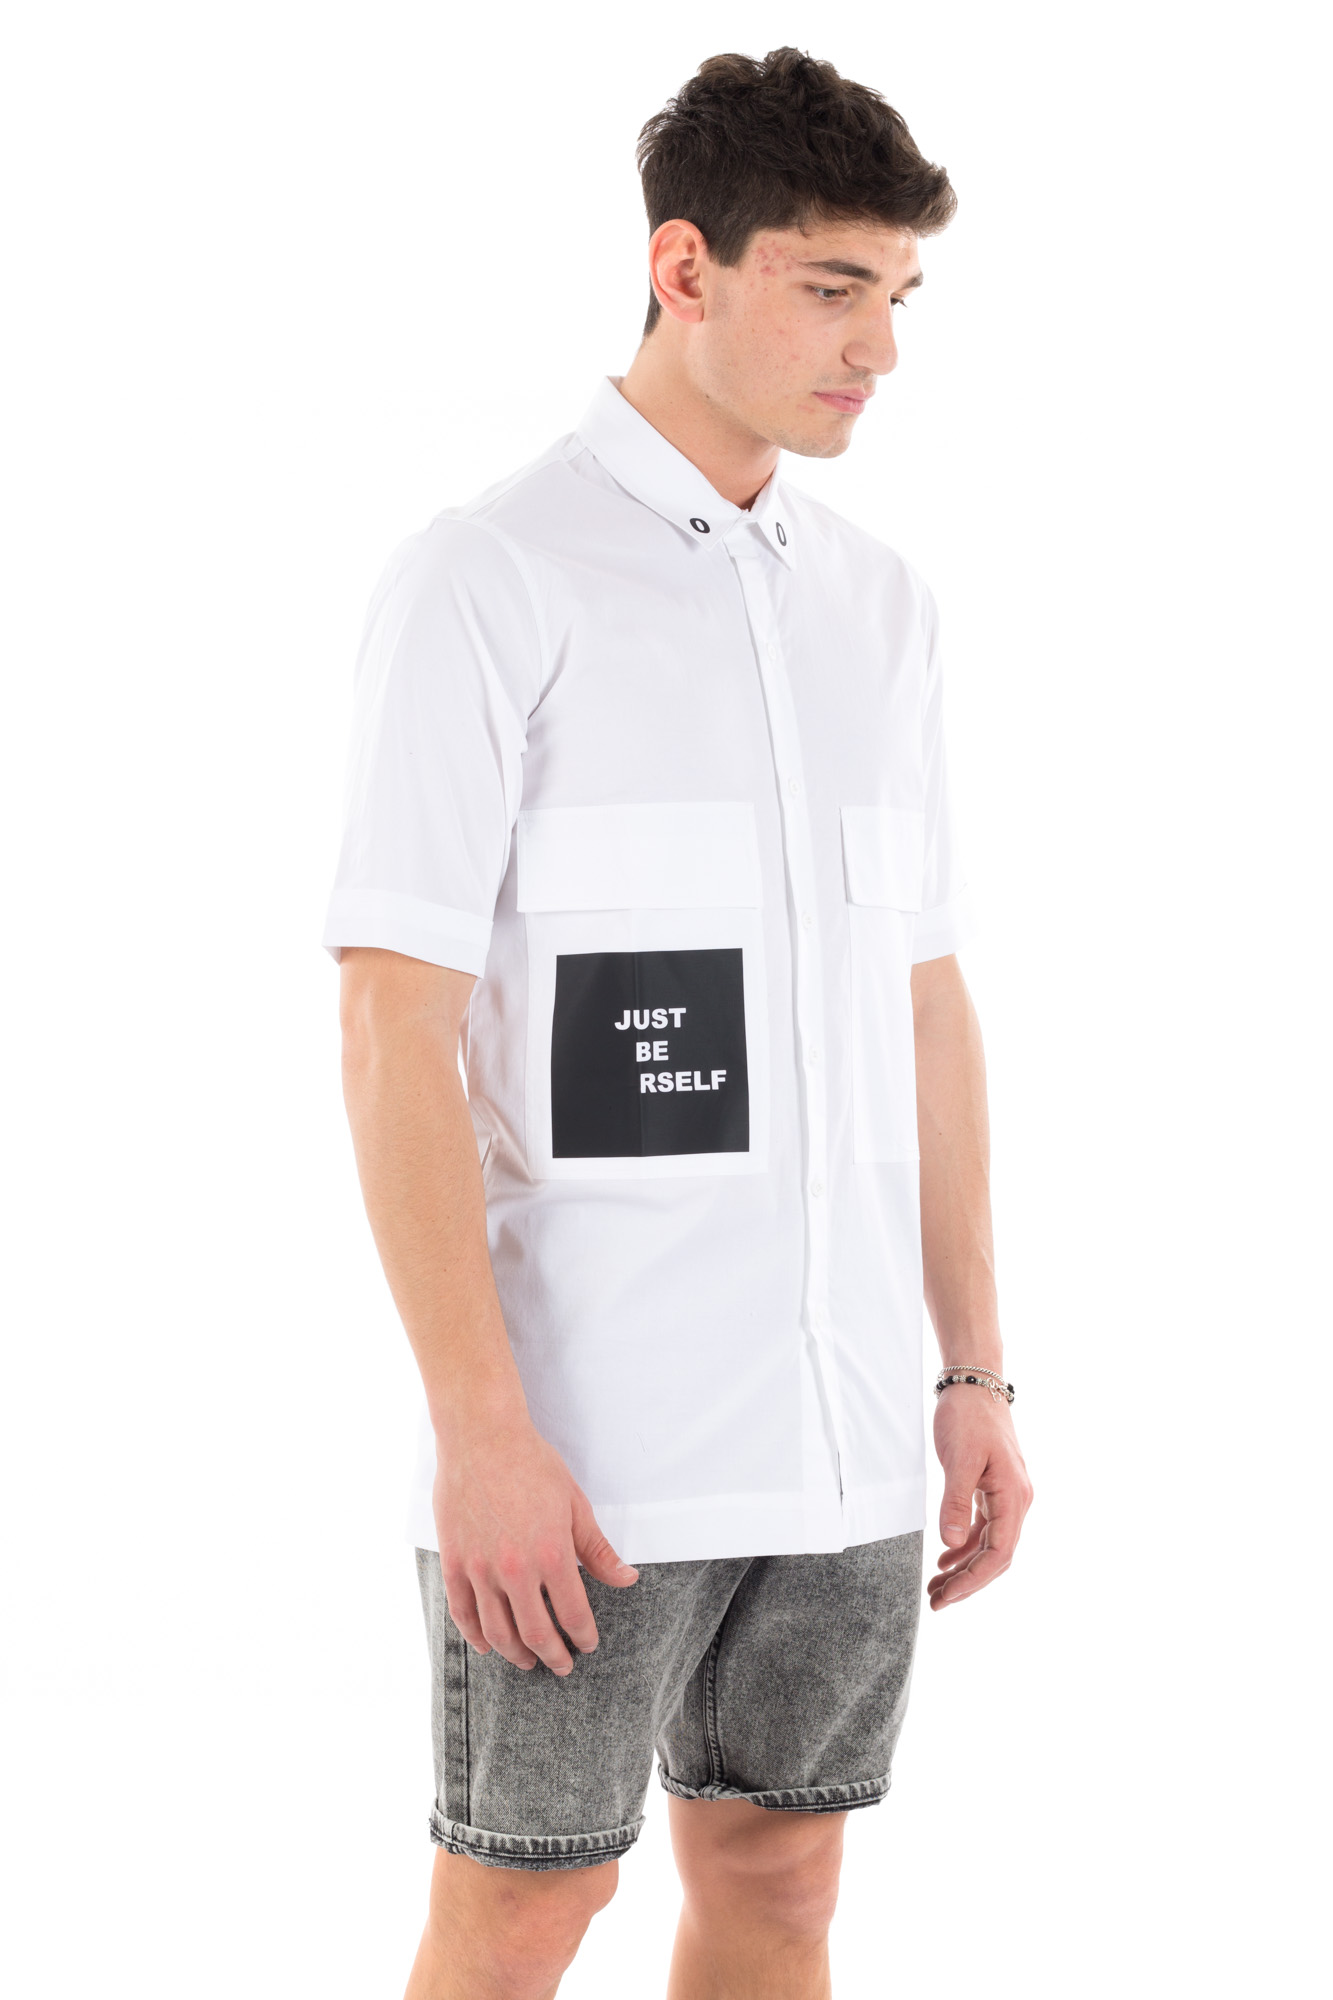 Numero 00 - Shirt with double front pocket